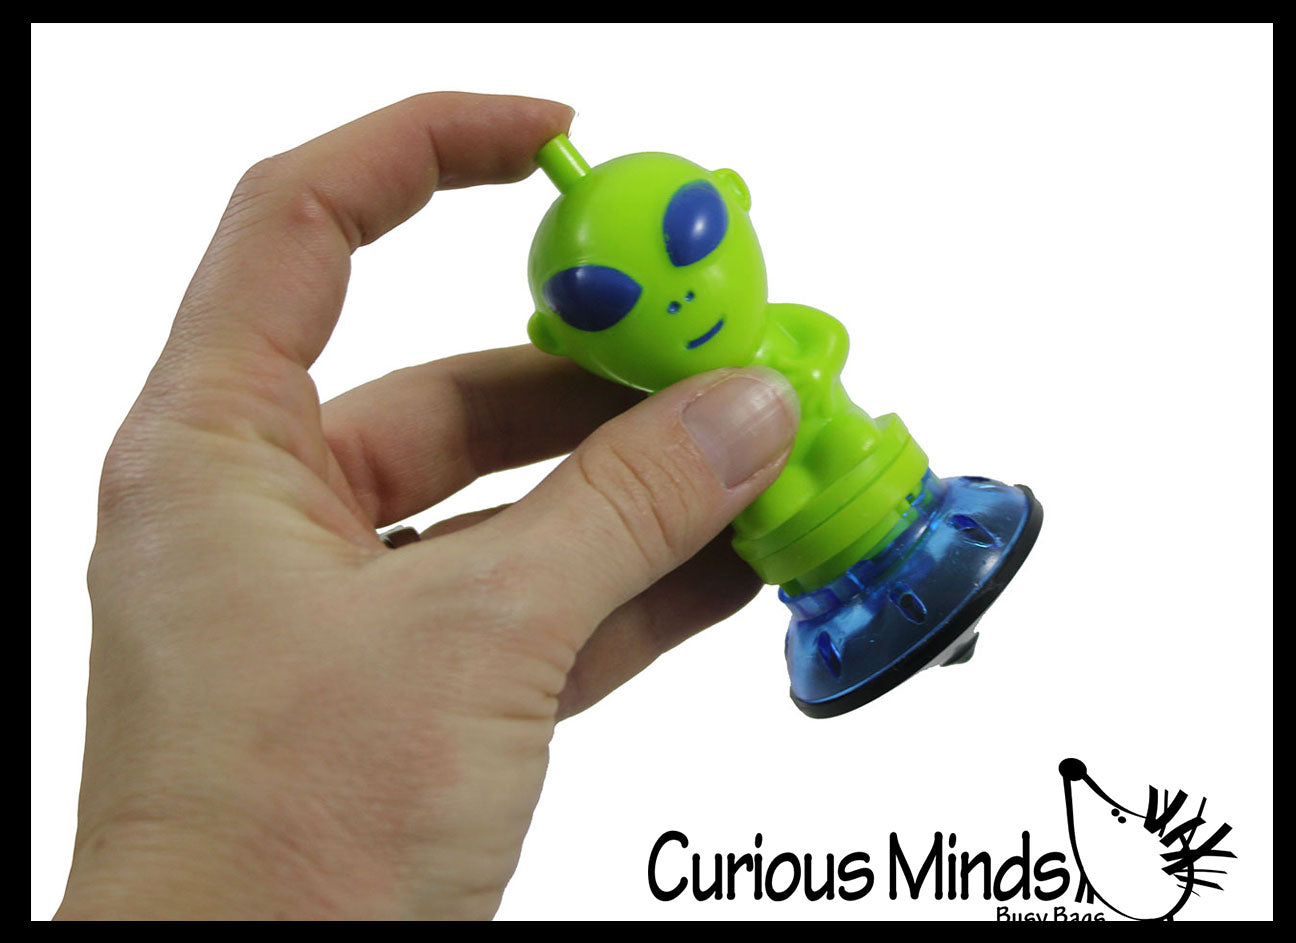 LAST CHANCE - LIMITED STOCK - Wind Up Alien and Astronaut Launcher Spinning Top Toy